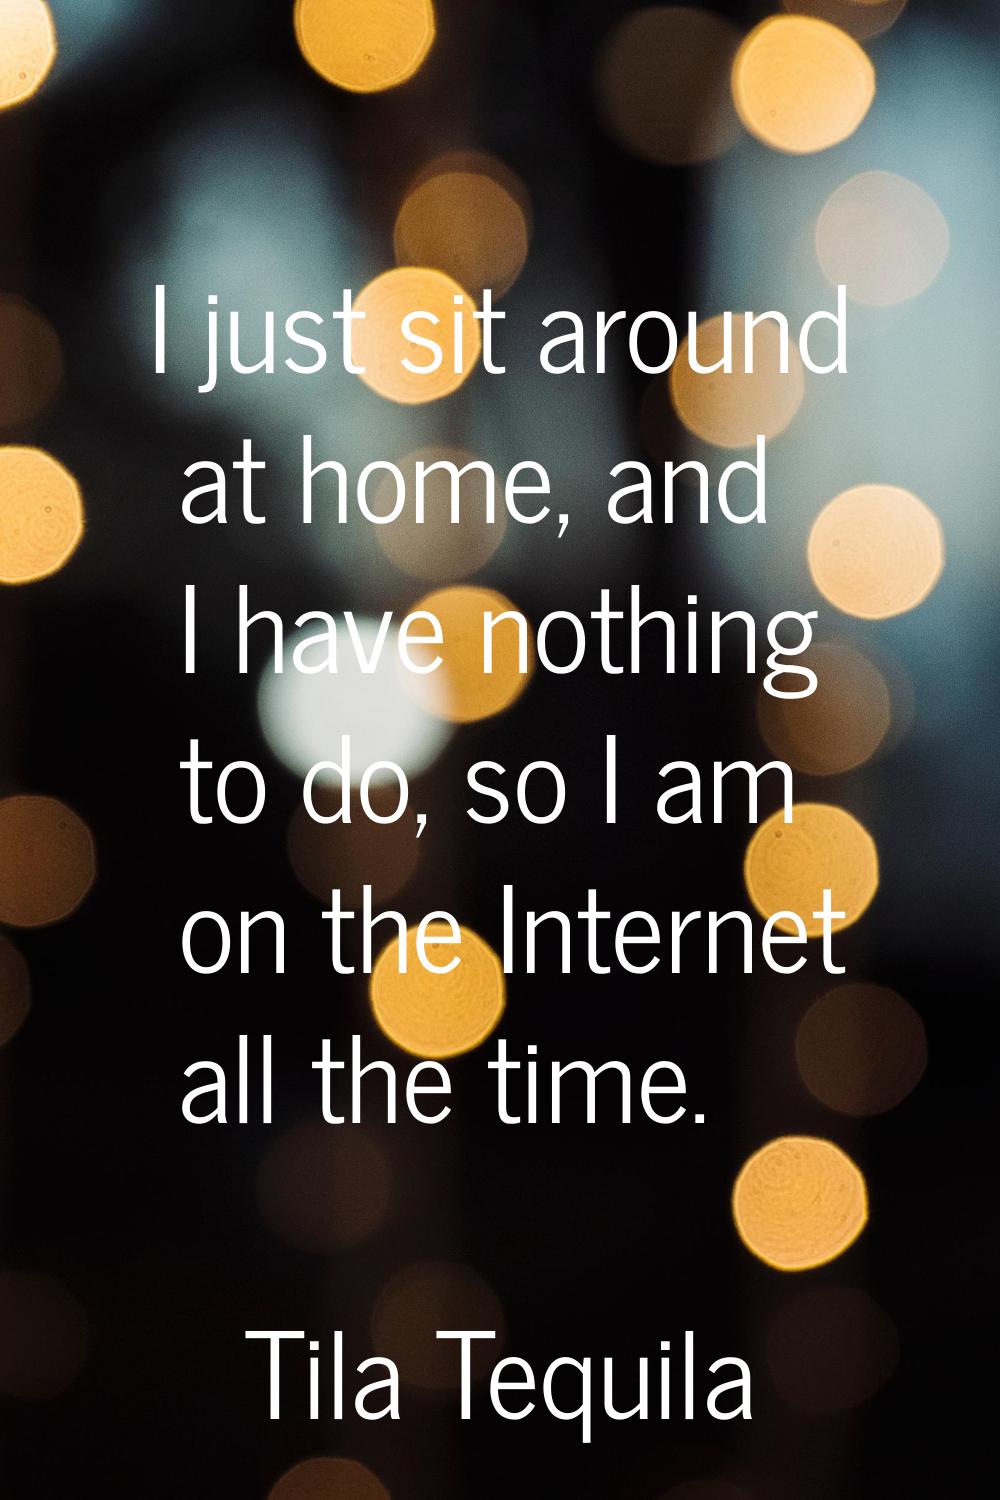 I just sit around at home, and I have nothing to do, so I am on the Internet all the time.